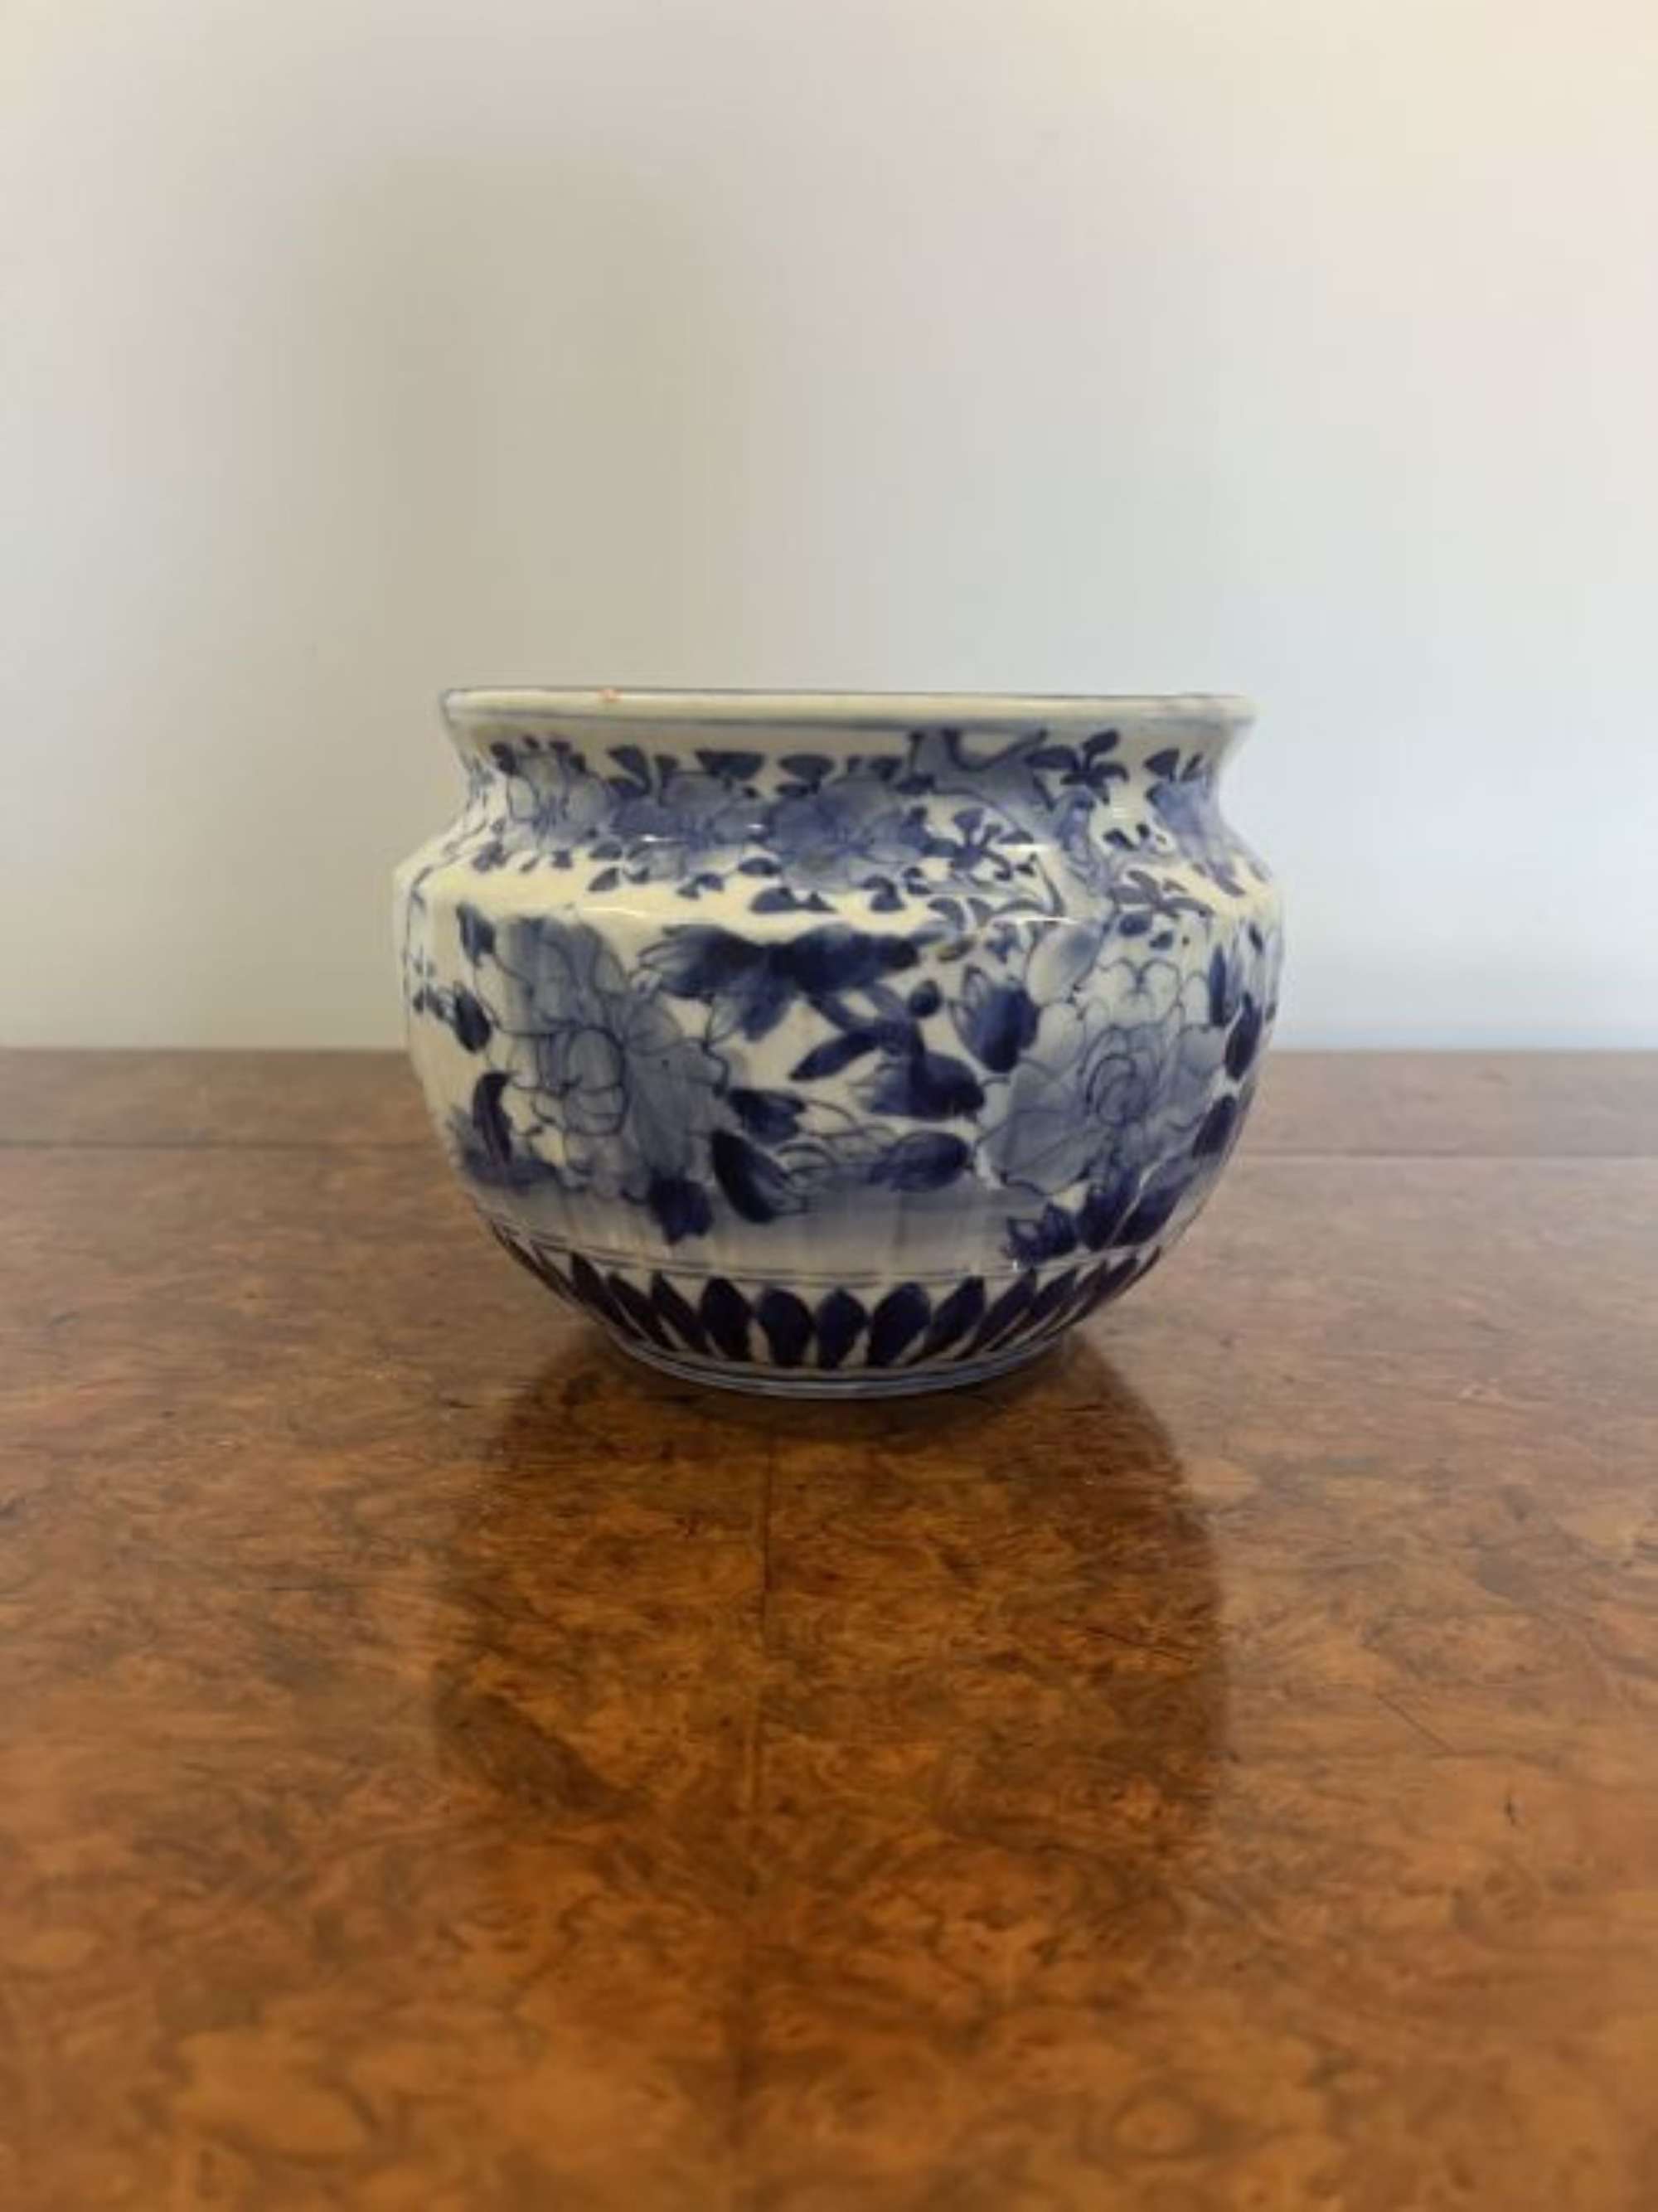 Lovely antique Japanese blue and white jardiniere